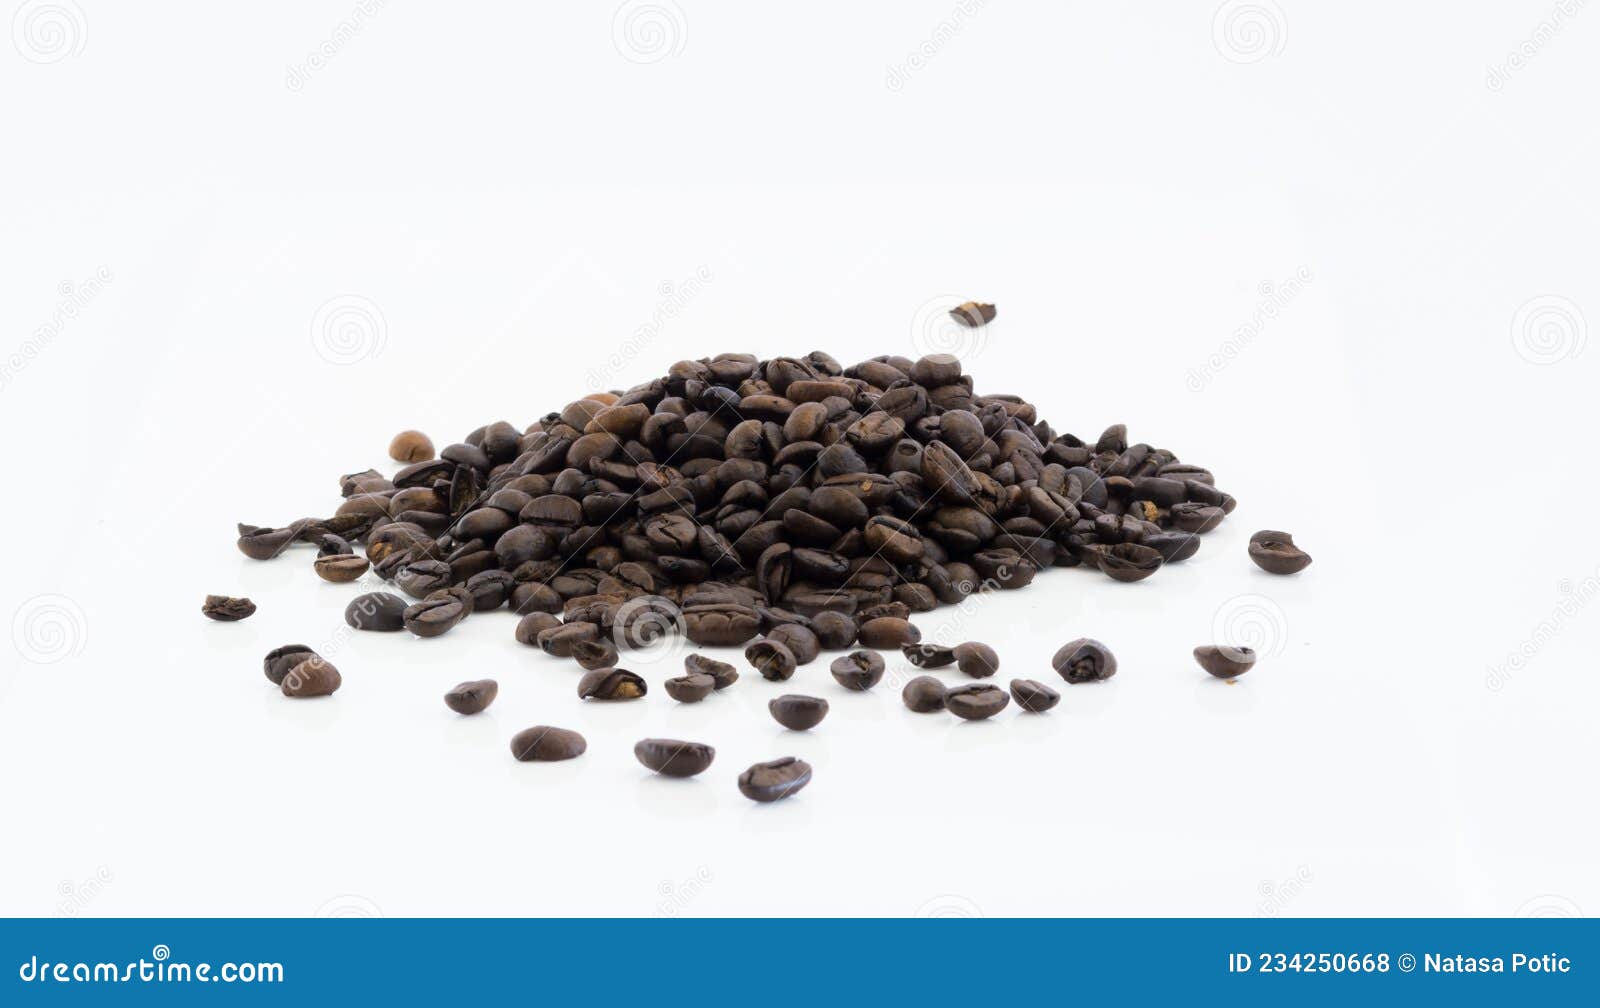 coffee beans raw close up